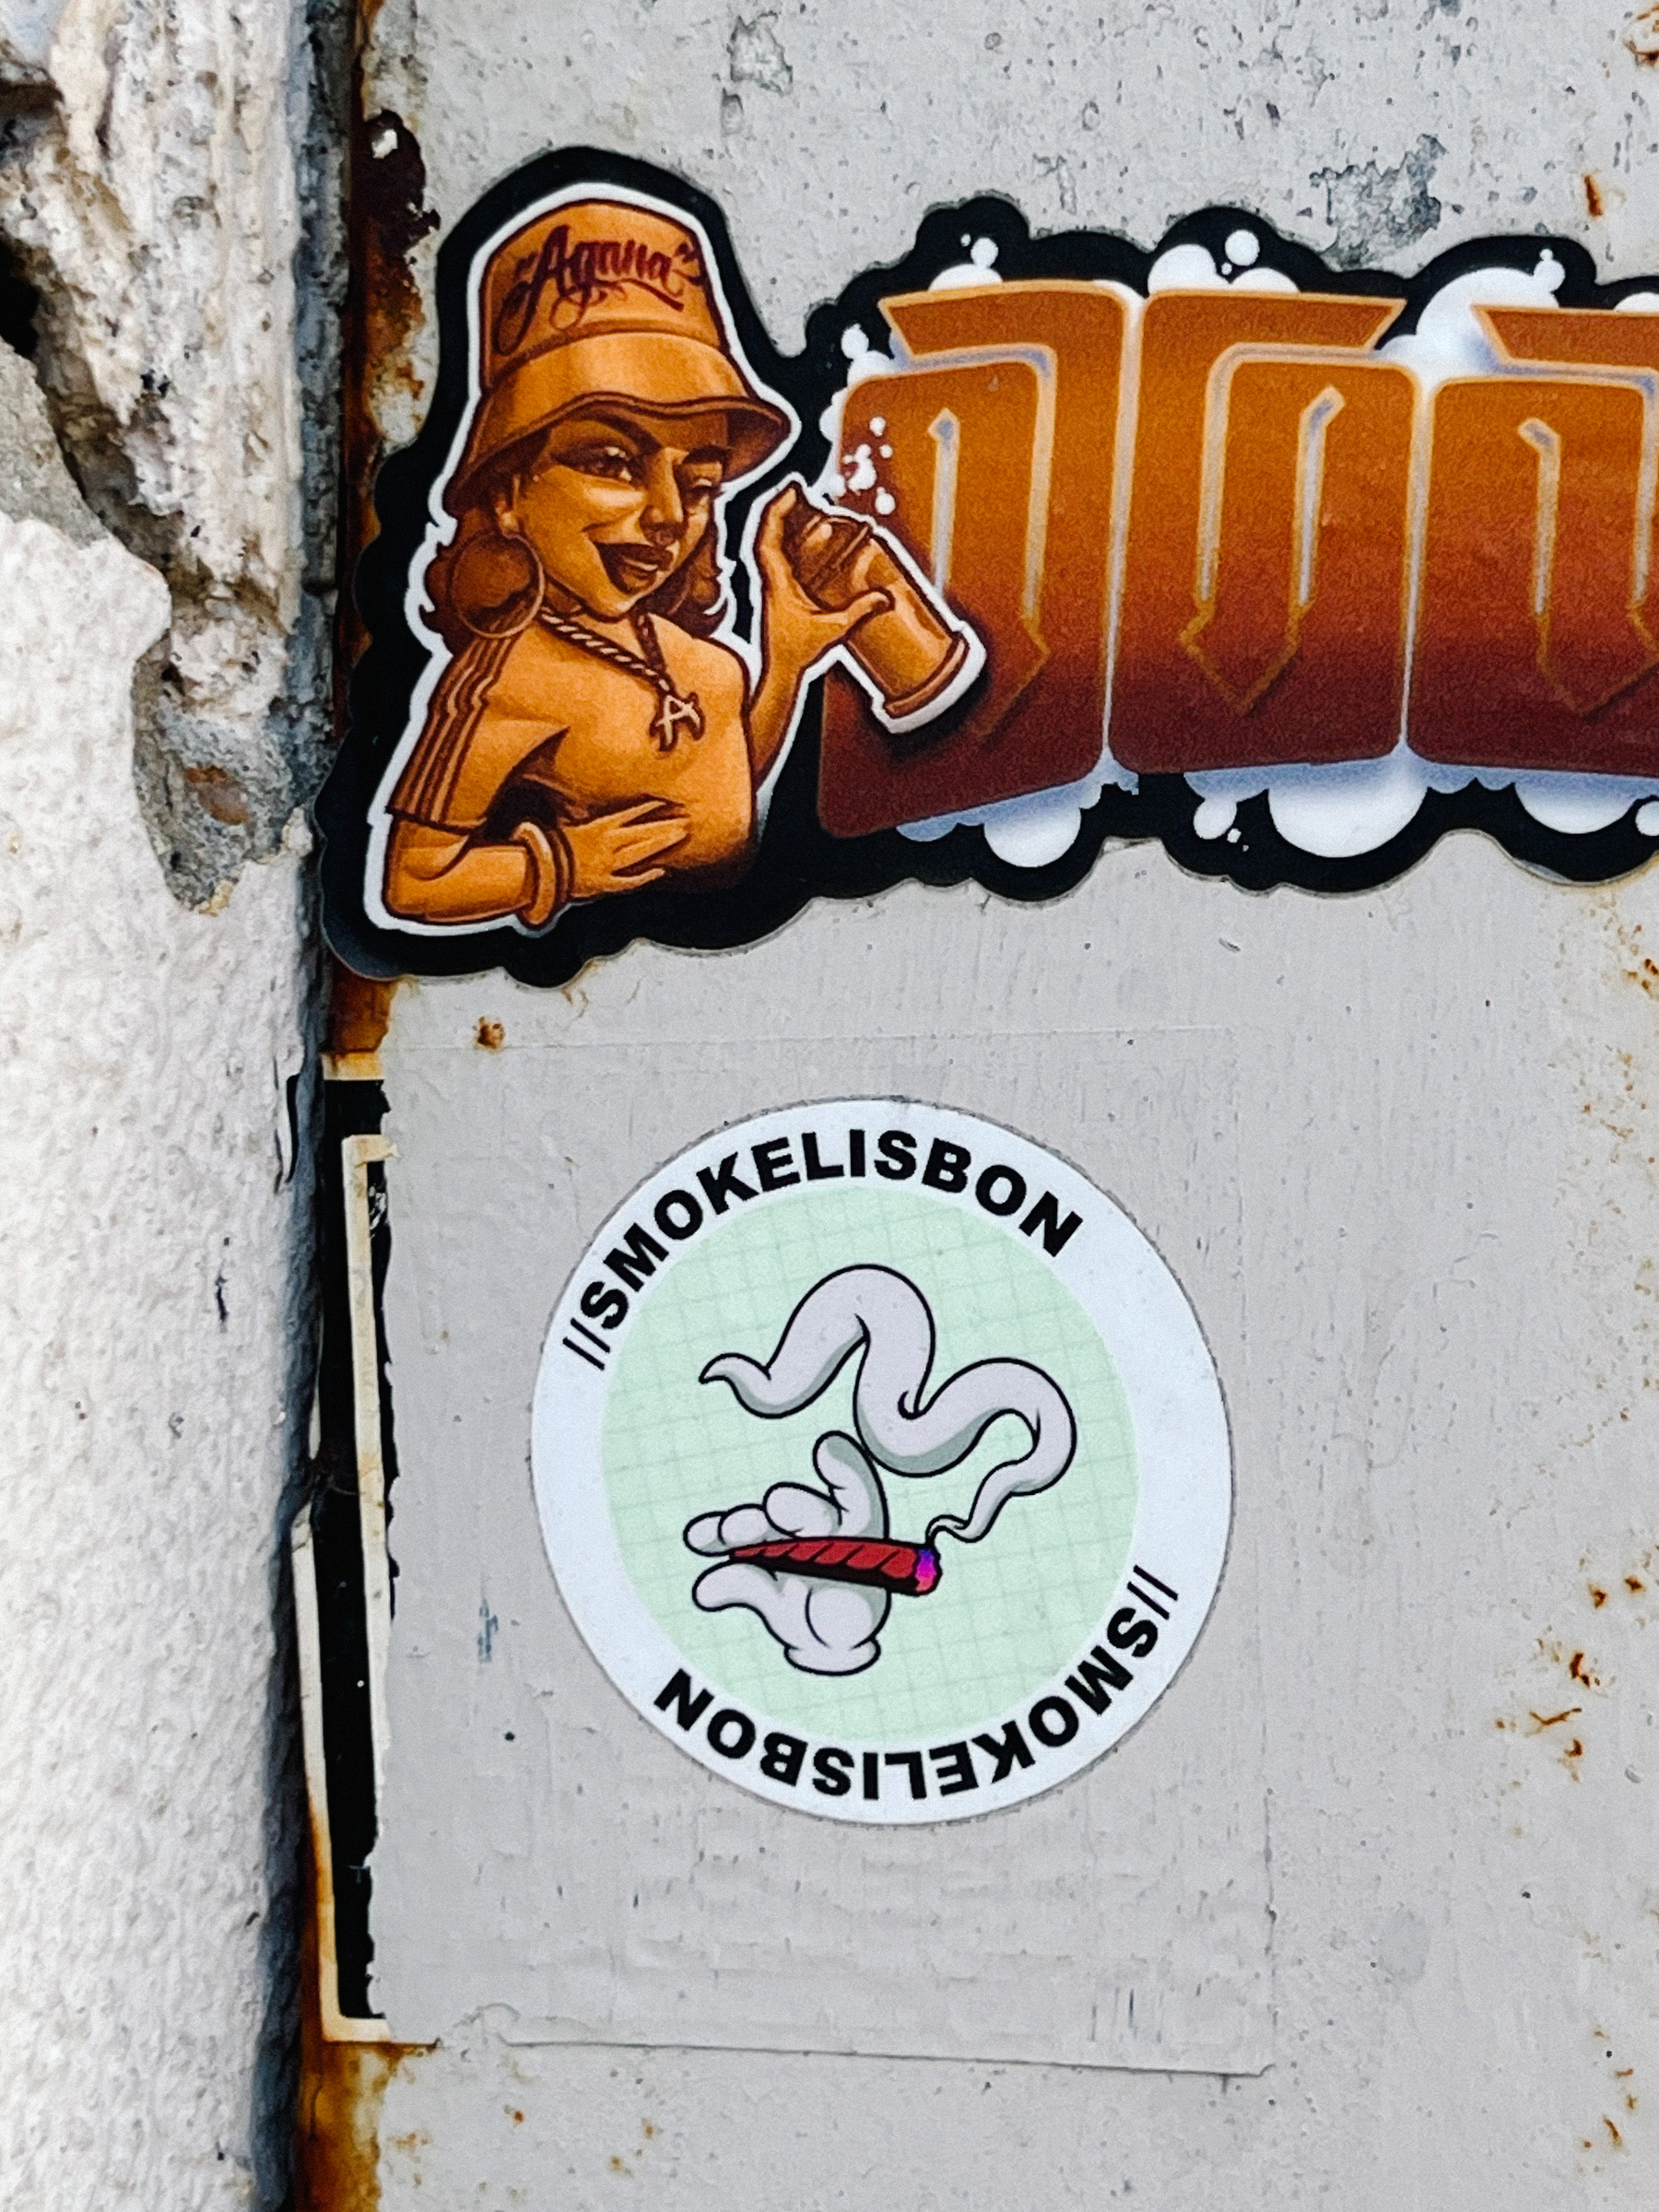 Two stickers. One of a graffiti artist, can in hand, and another one with a hand holding a joint, and “smokelisbon” written on the border. 